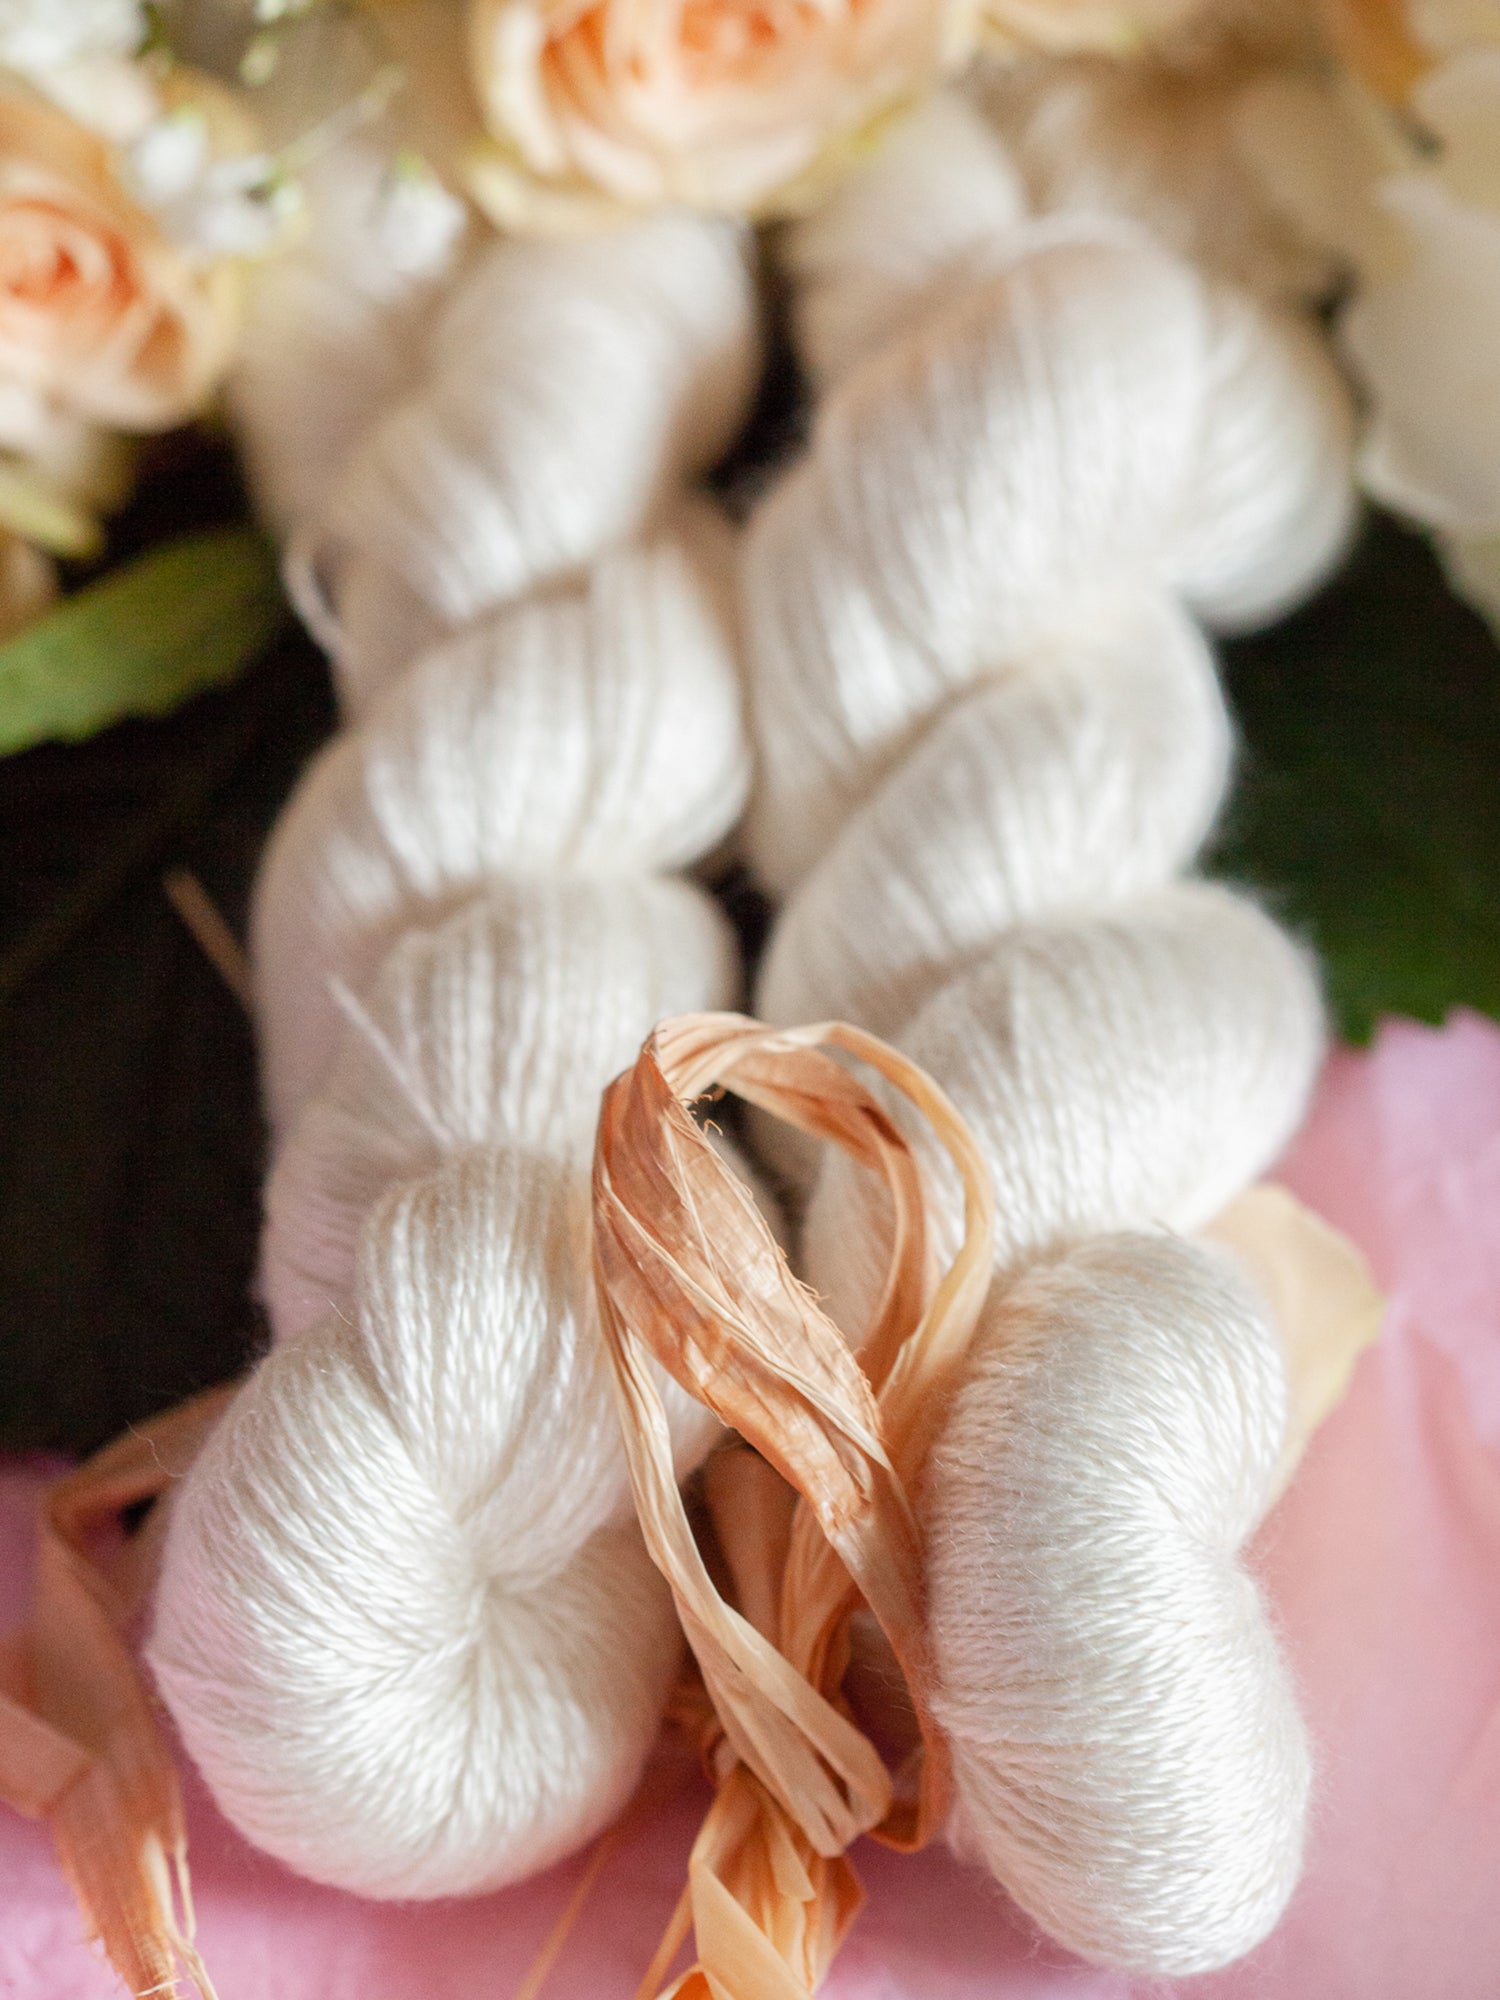 Recycled Silk Cashmere Lace Weight Yarn in Tan